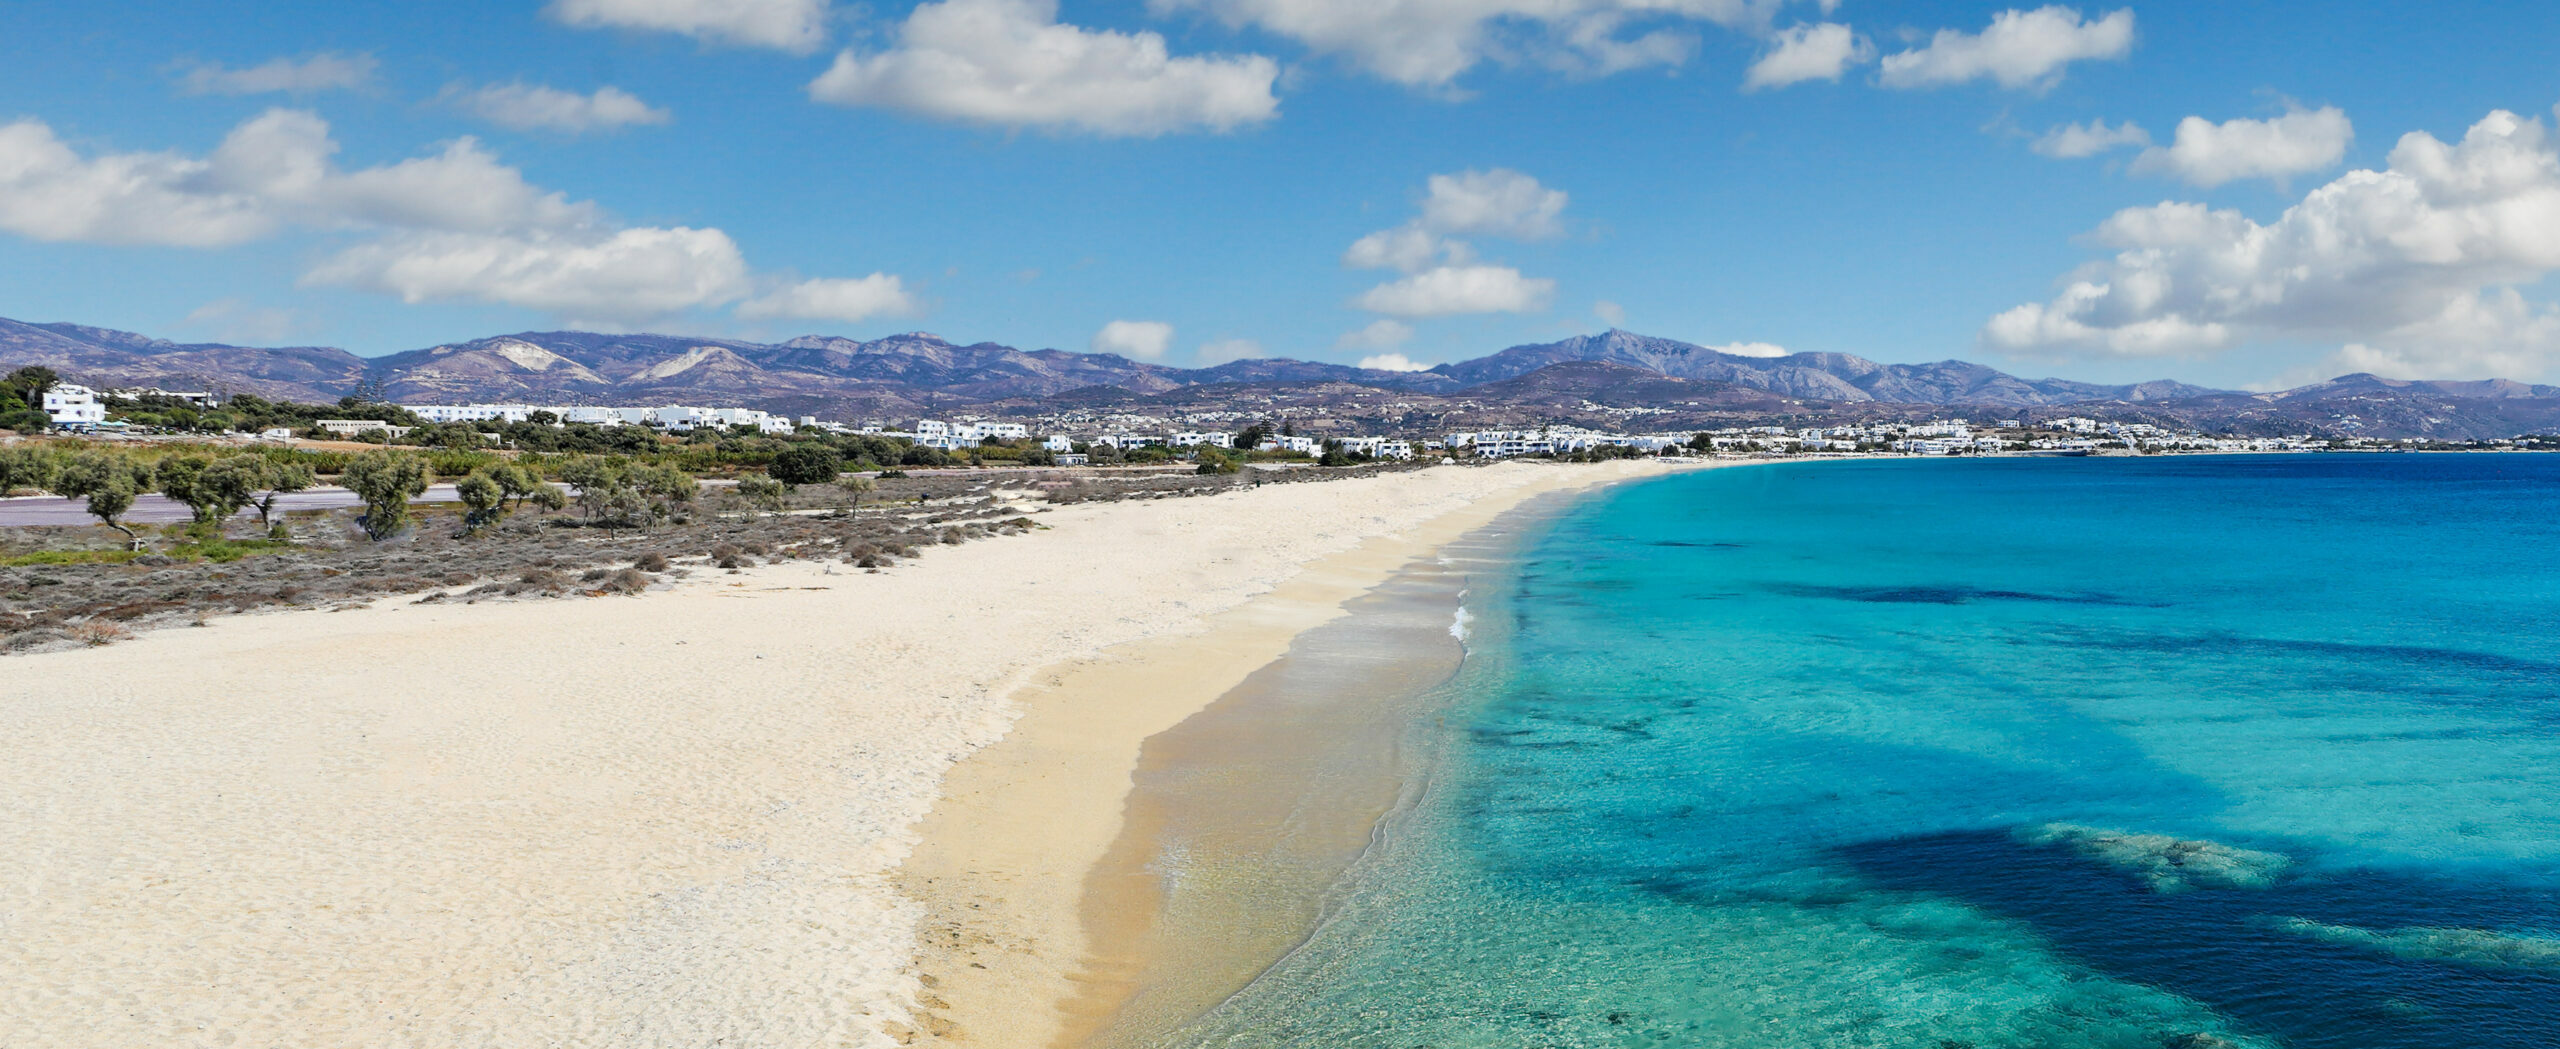 Agios Prokopios: The most famous and largest beach of Naxos